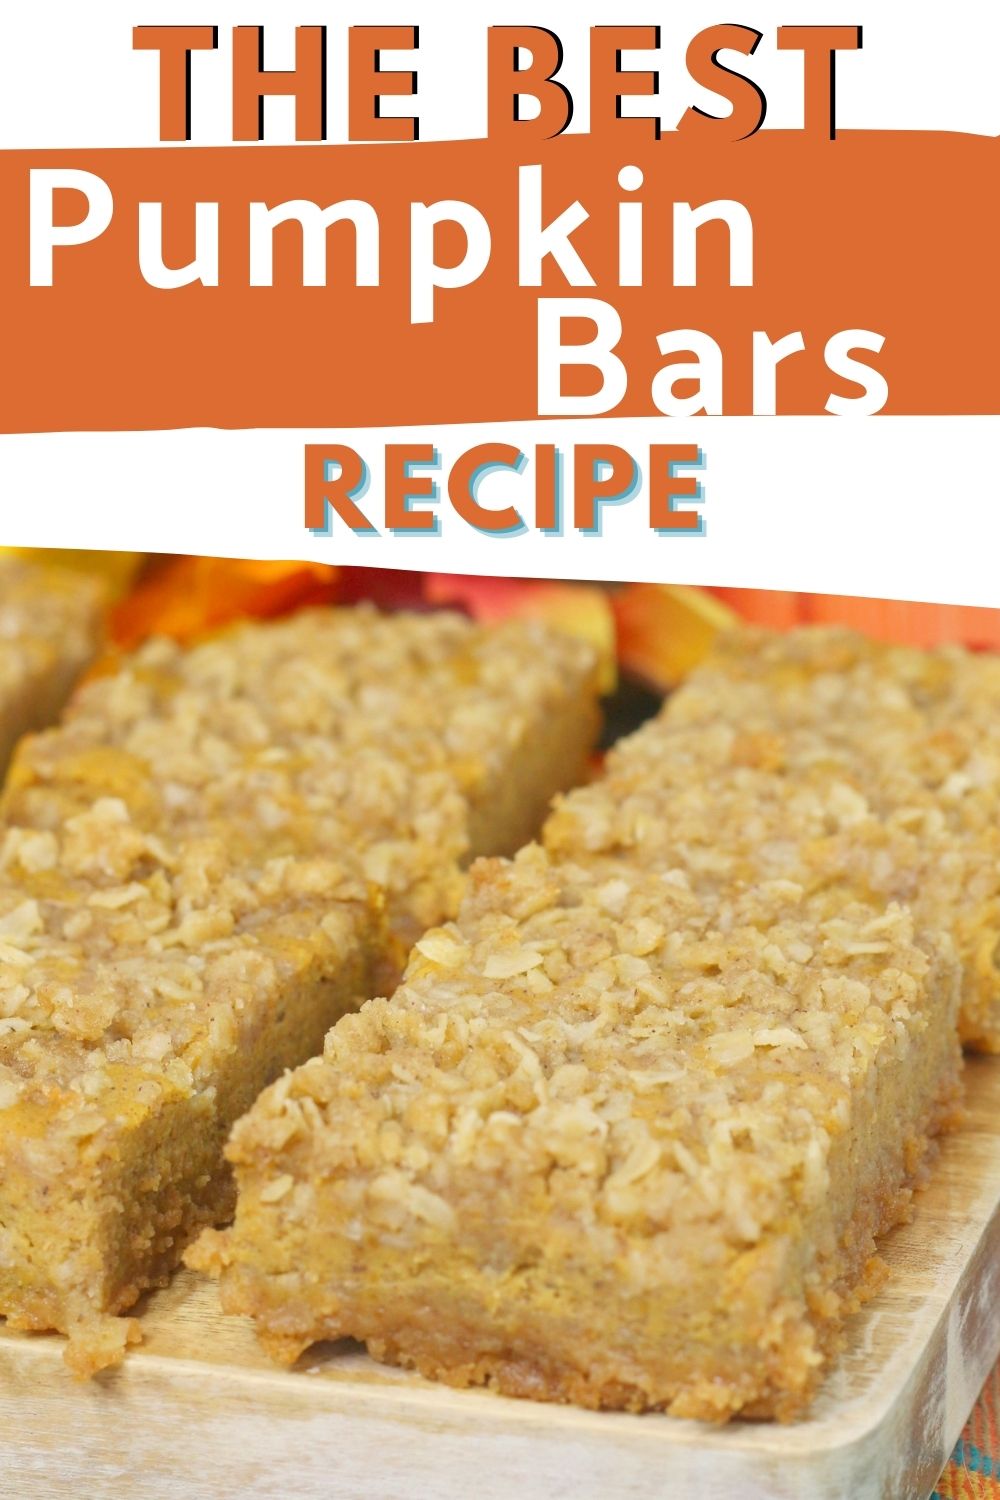 The Best Pumpkin Bar Recipe with Streusel Topping - Mama Loves to Eat